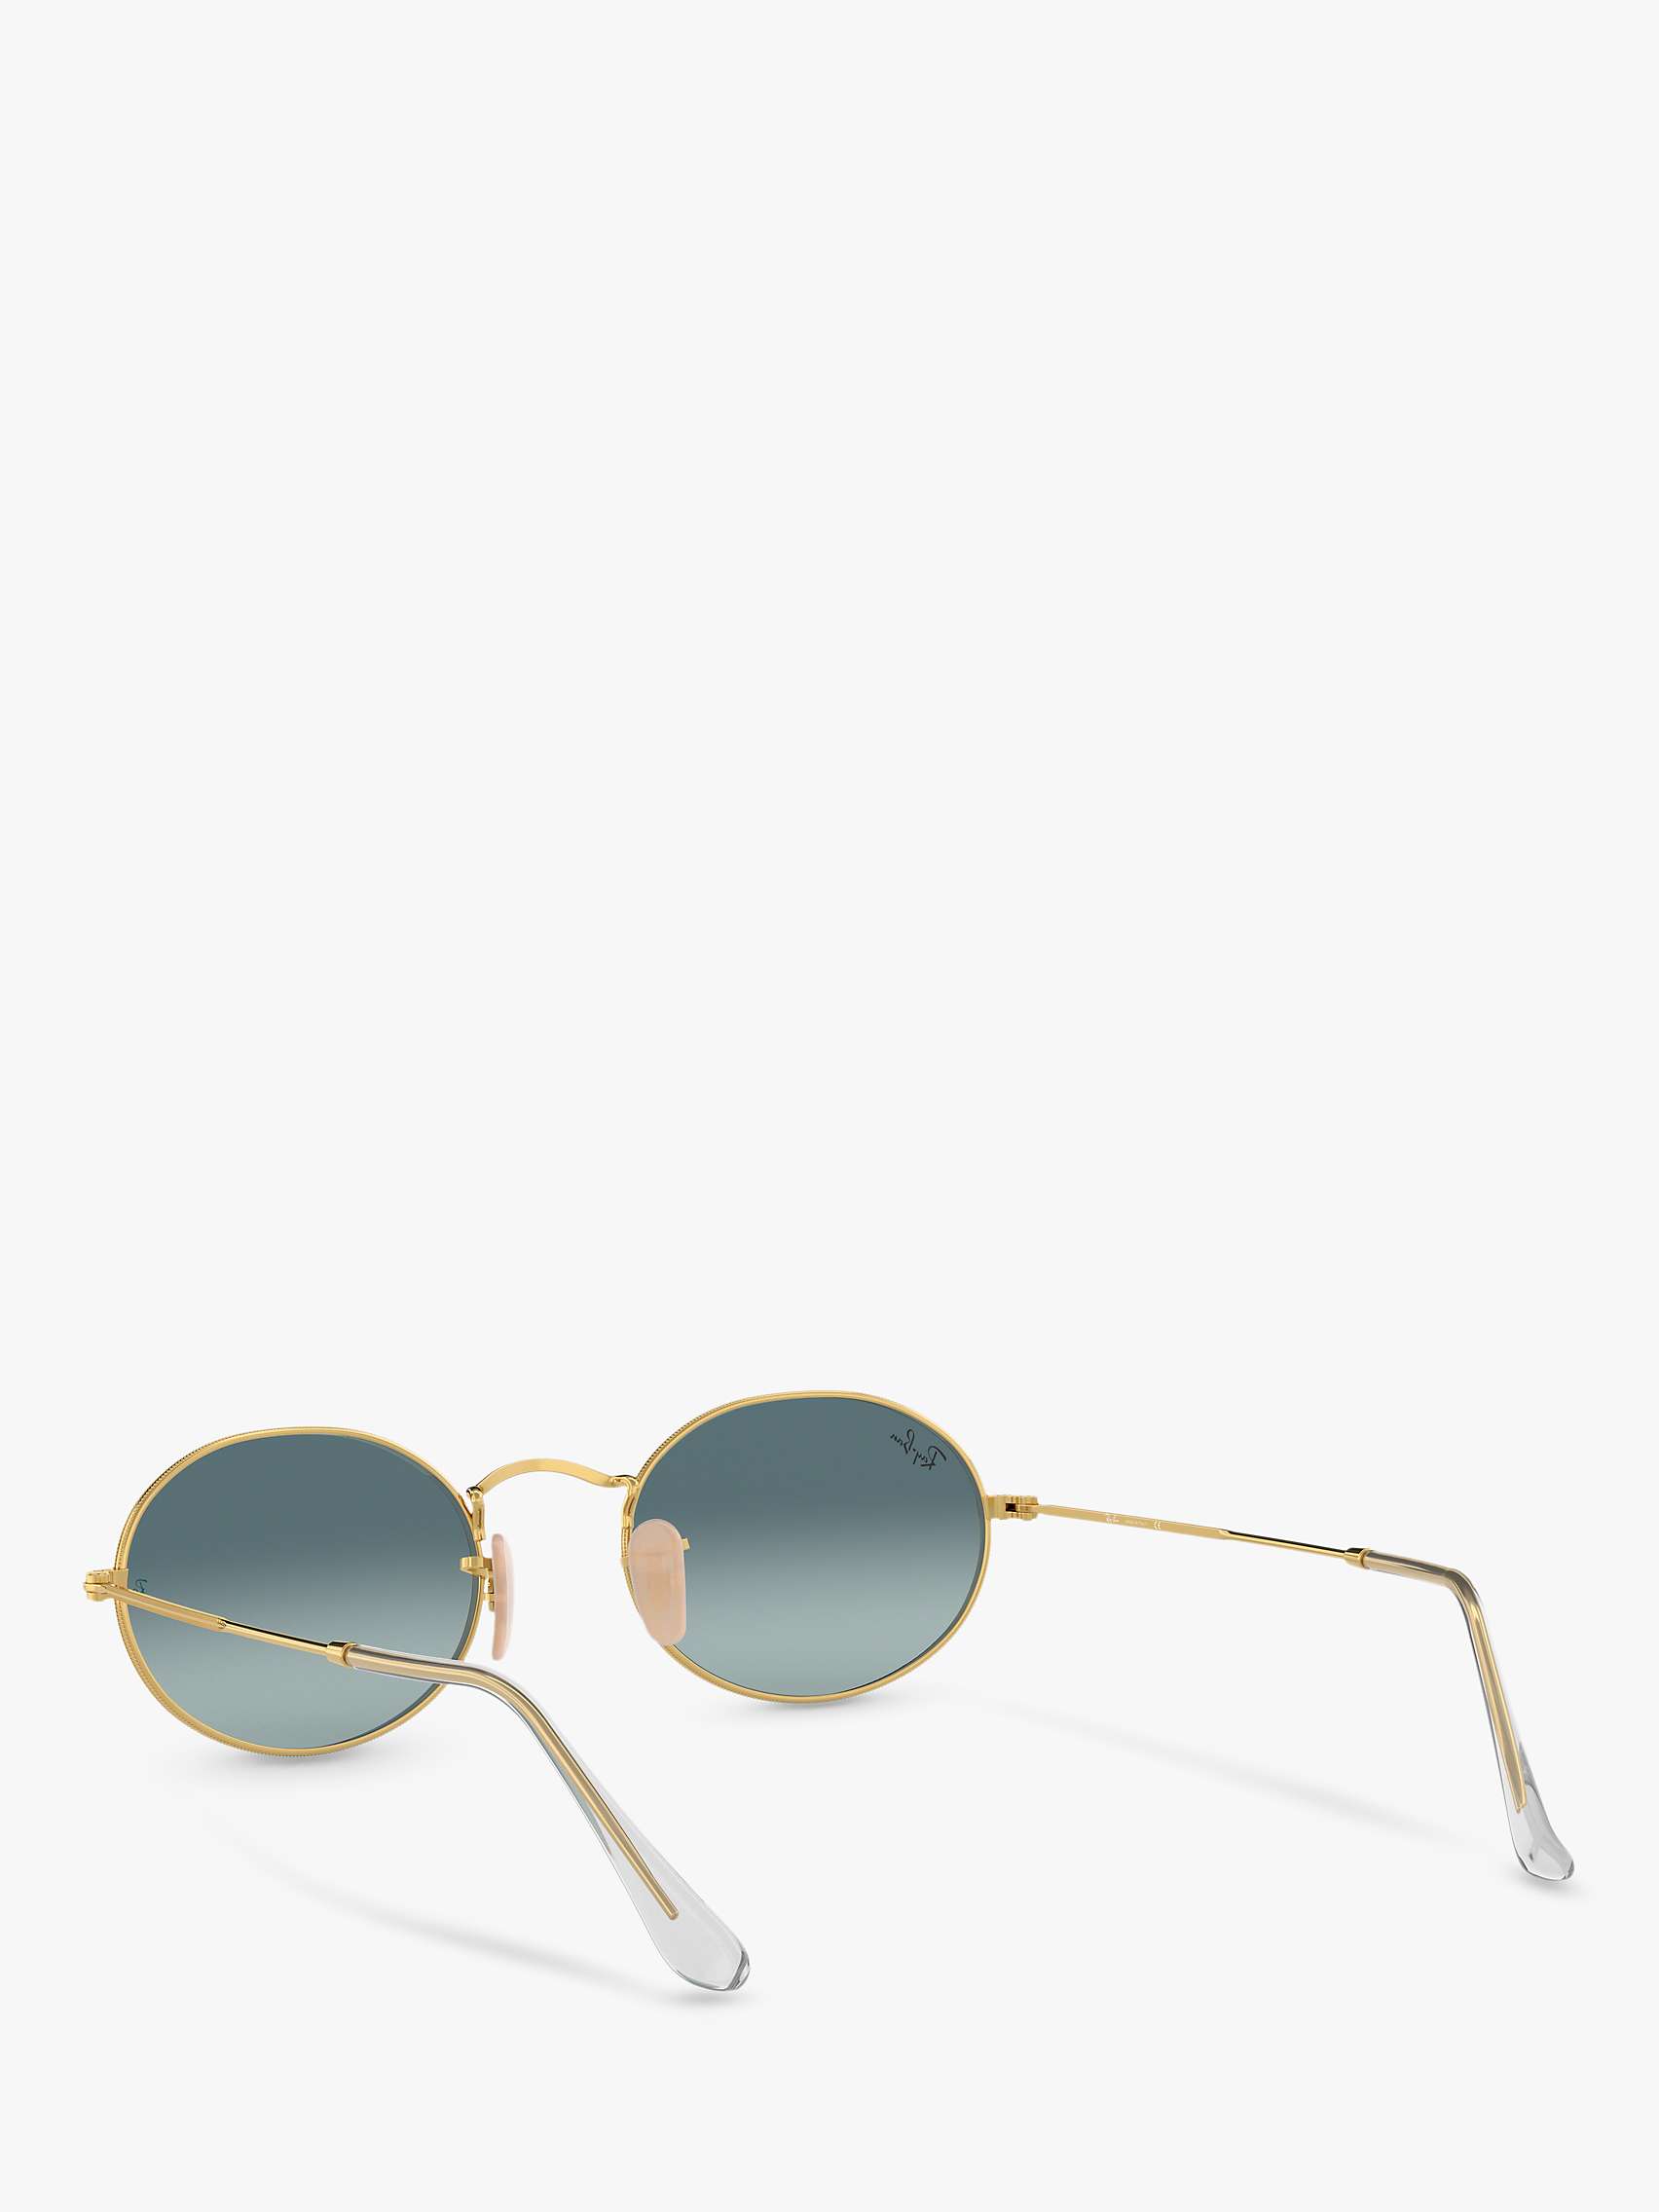 Buy Ray-Ban RB3547 Women's Oval Flat Lens Sunglasses, Gold/Grey Gradient Online at johnlewis.com